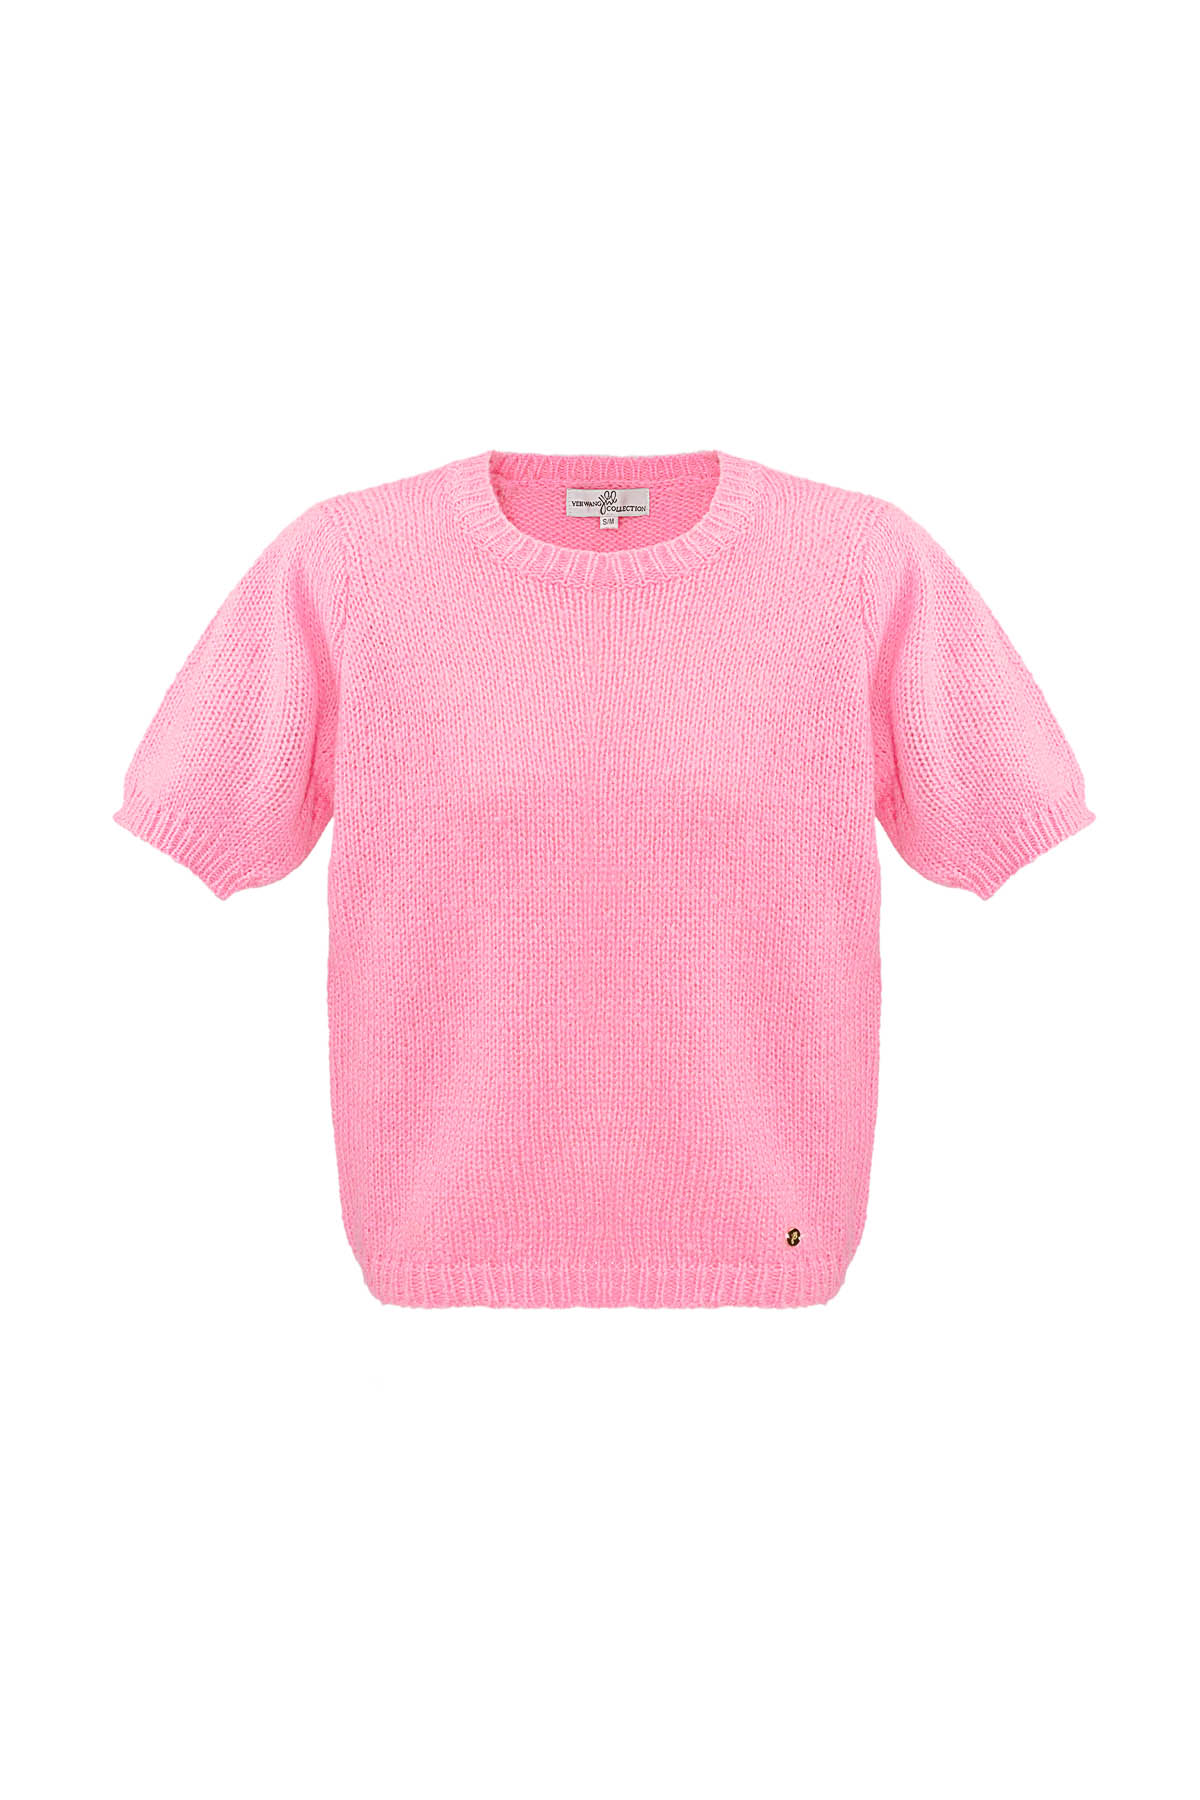 Basic shirt with puff sleeves - baby pink h5 